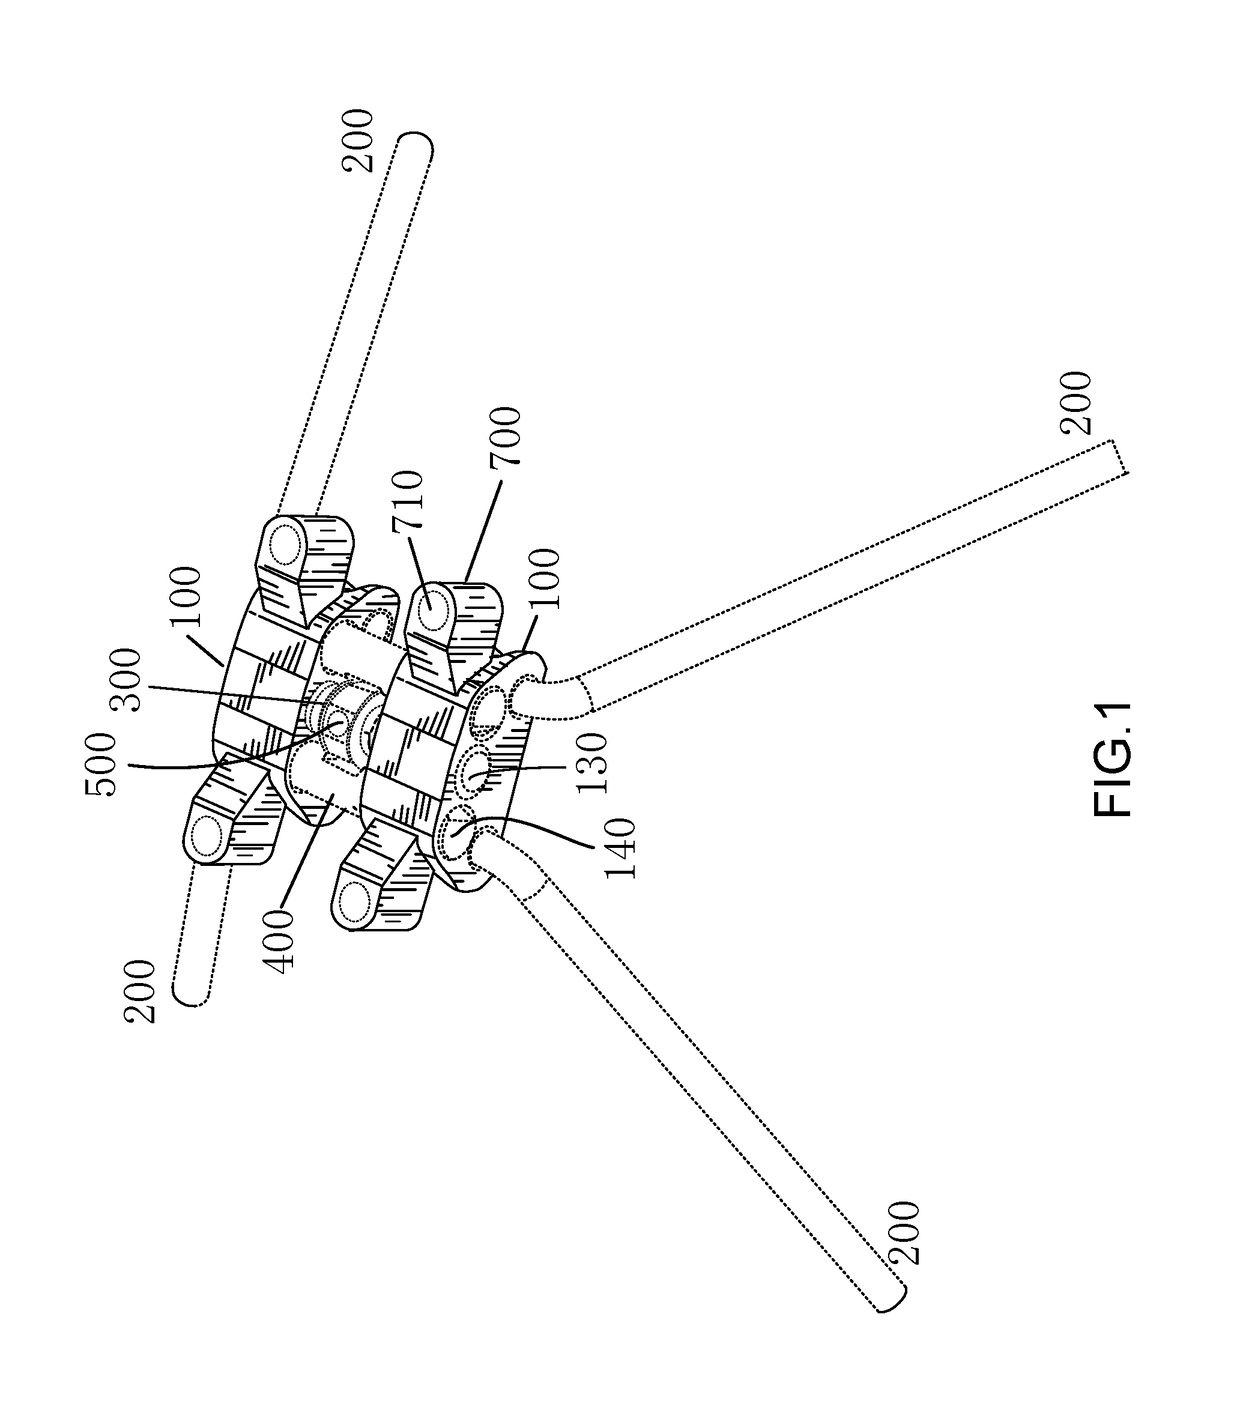 Maxillary skeletal expander device and method